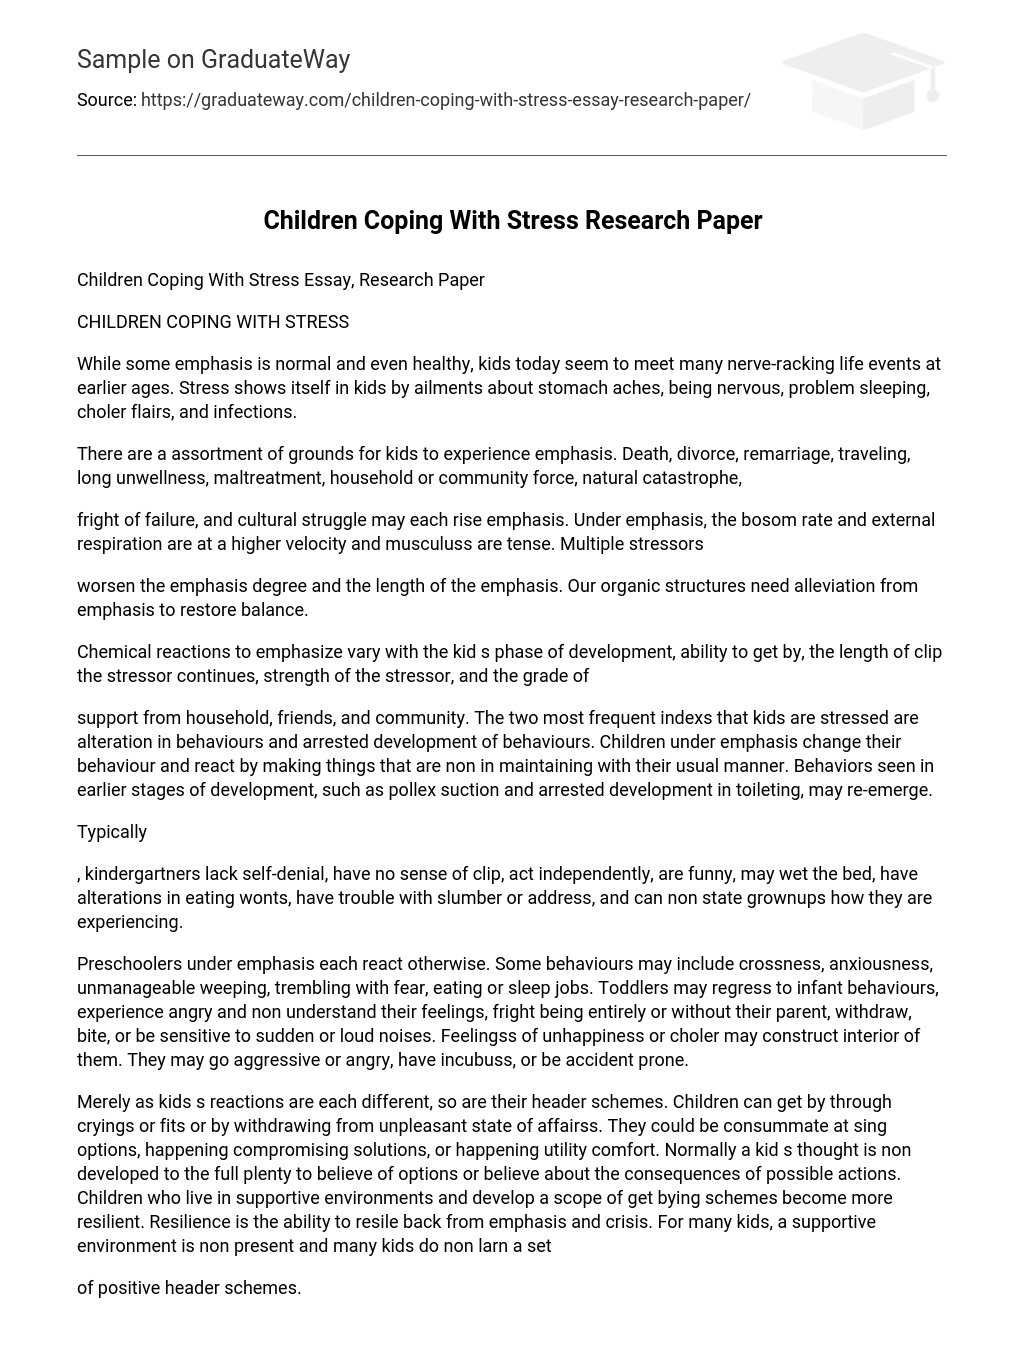 Children Coping With Stress Research Paper